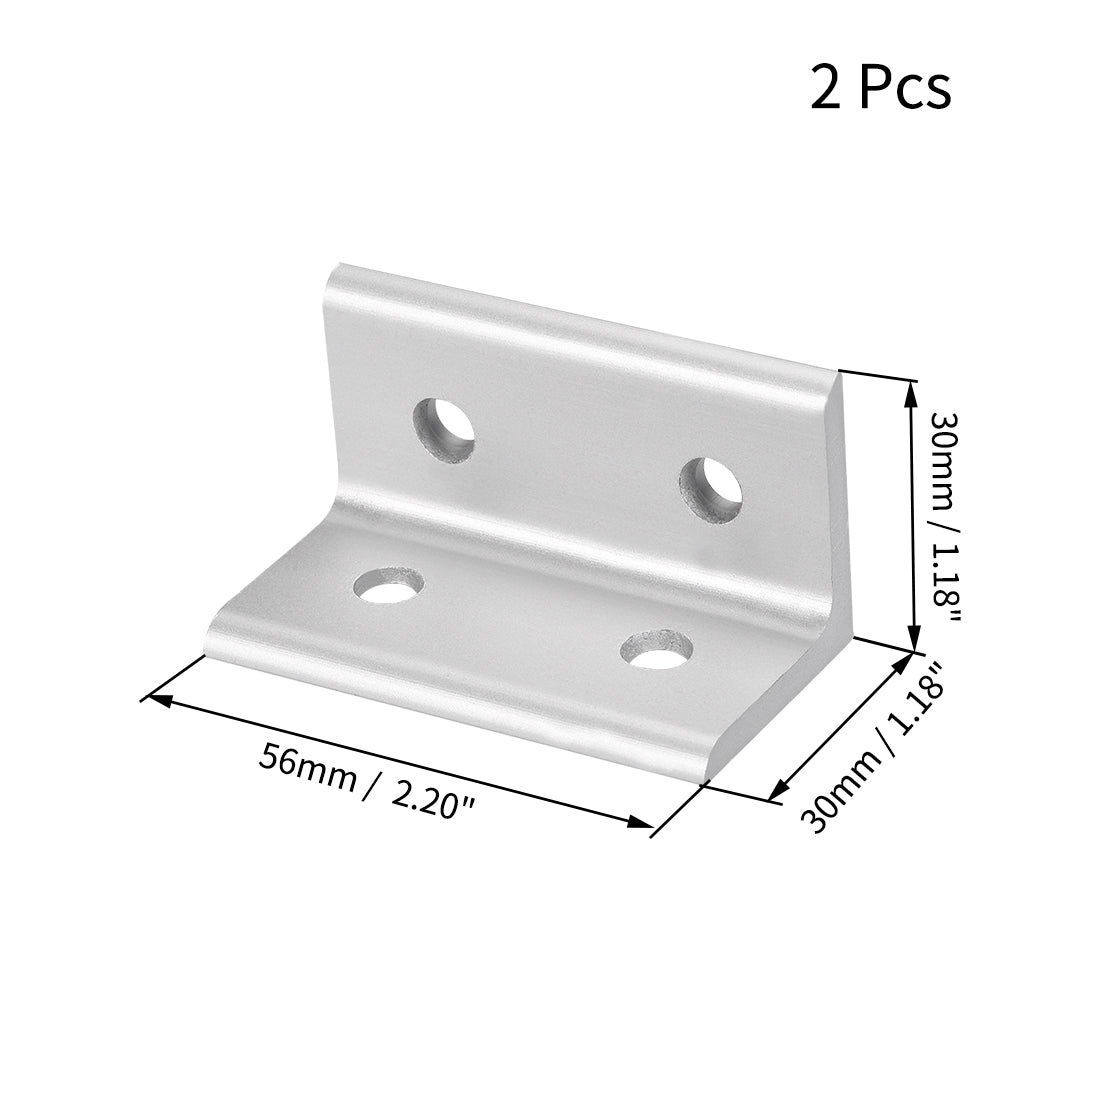 uxcell Uxcell 3060 Inside Corner Bracket for 3030 Series Aluminum Extrusion Profile with Slot 8mm, 2 Pcs